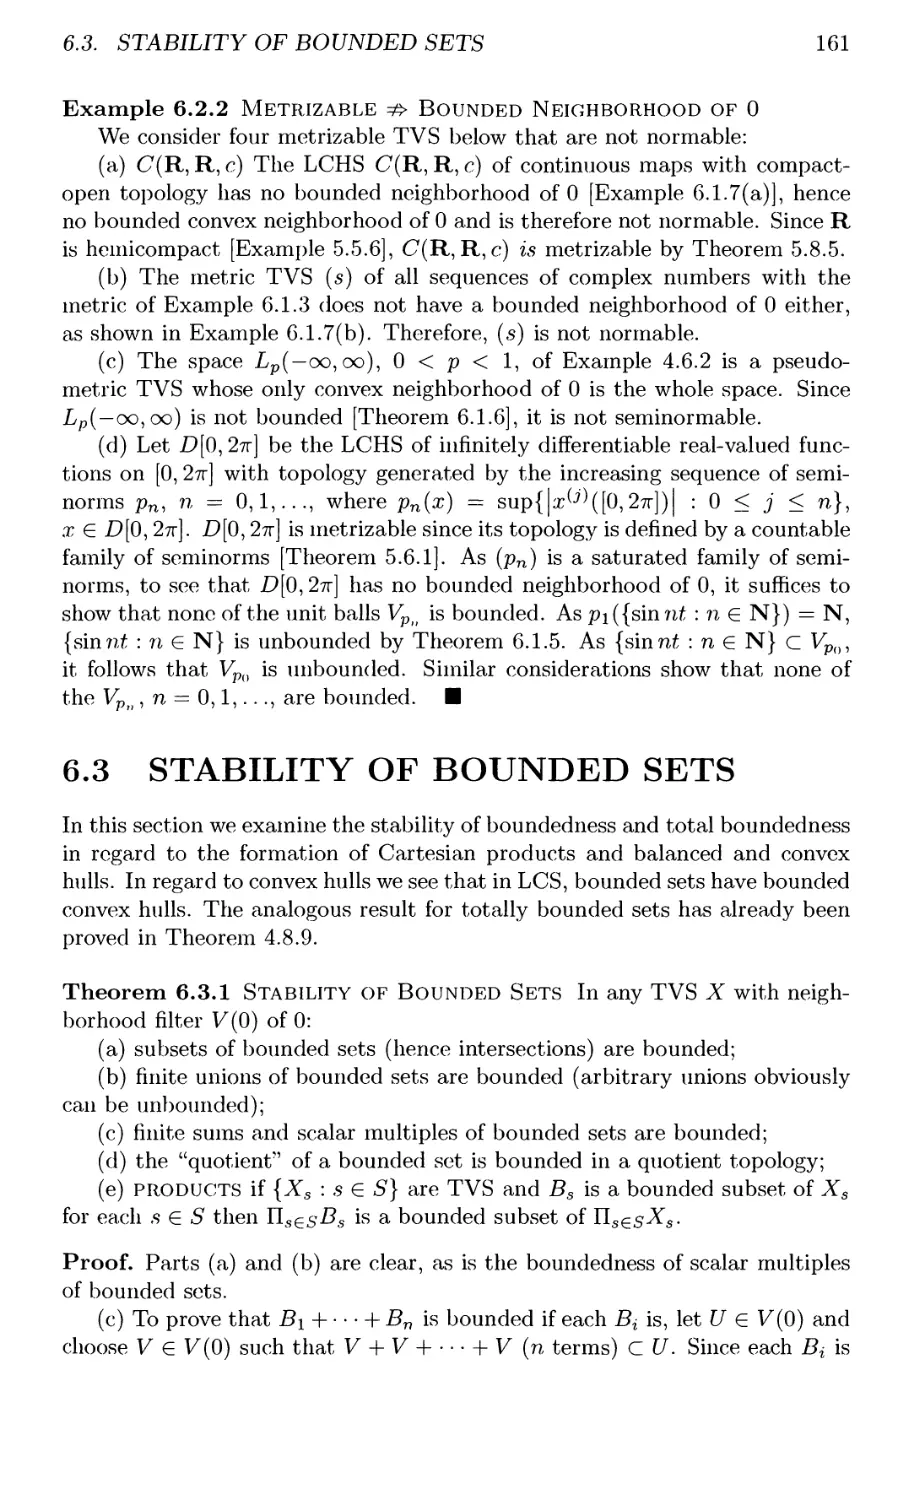 6.3 STABILITY OF BOUNDED SETS